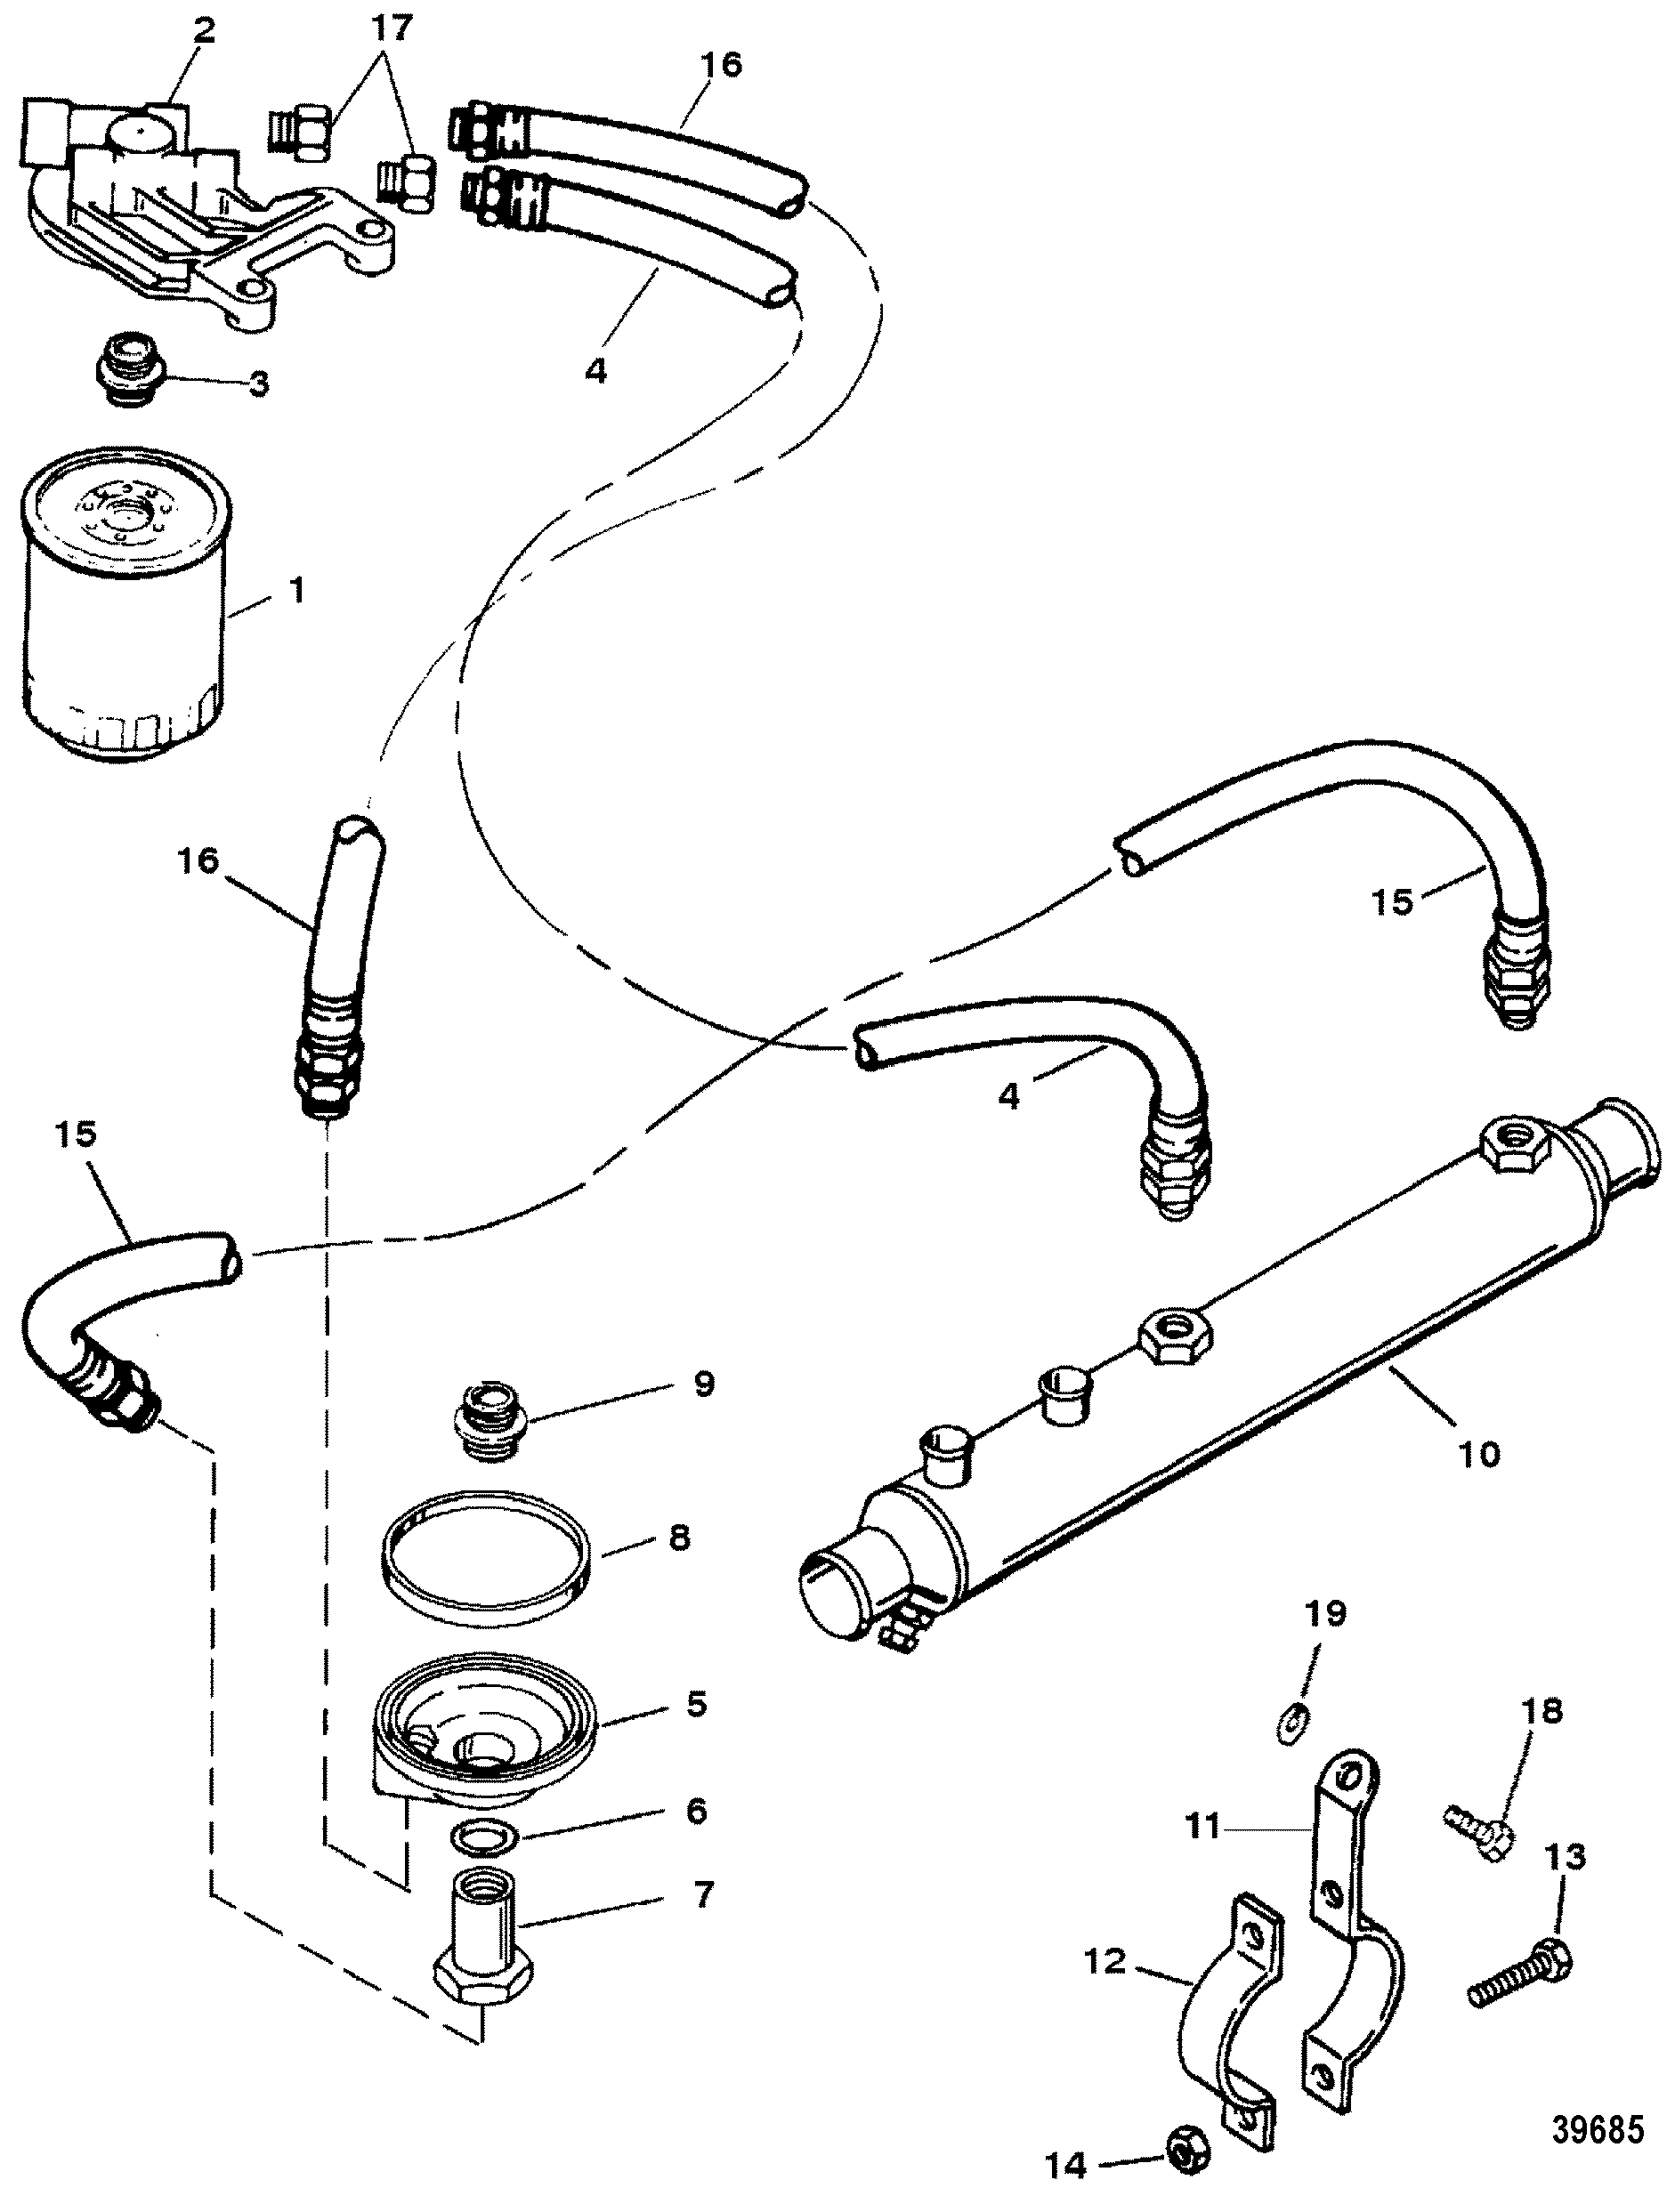 OIL FILTER AND ADAPTOR(454)